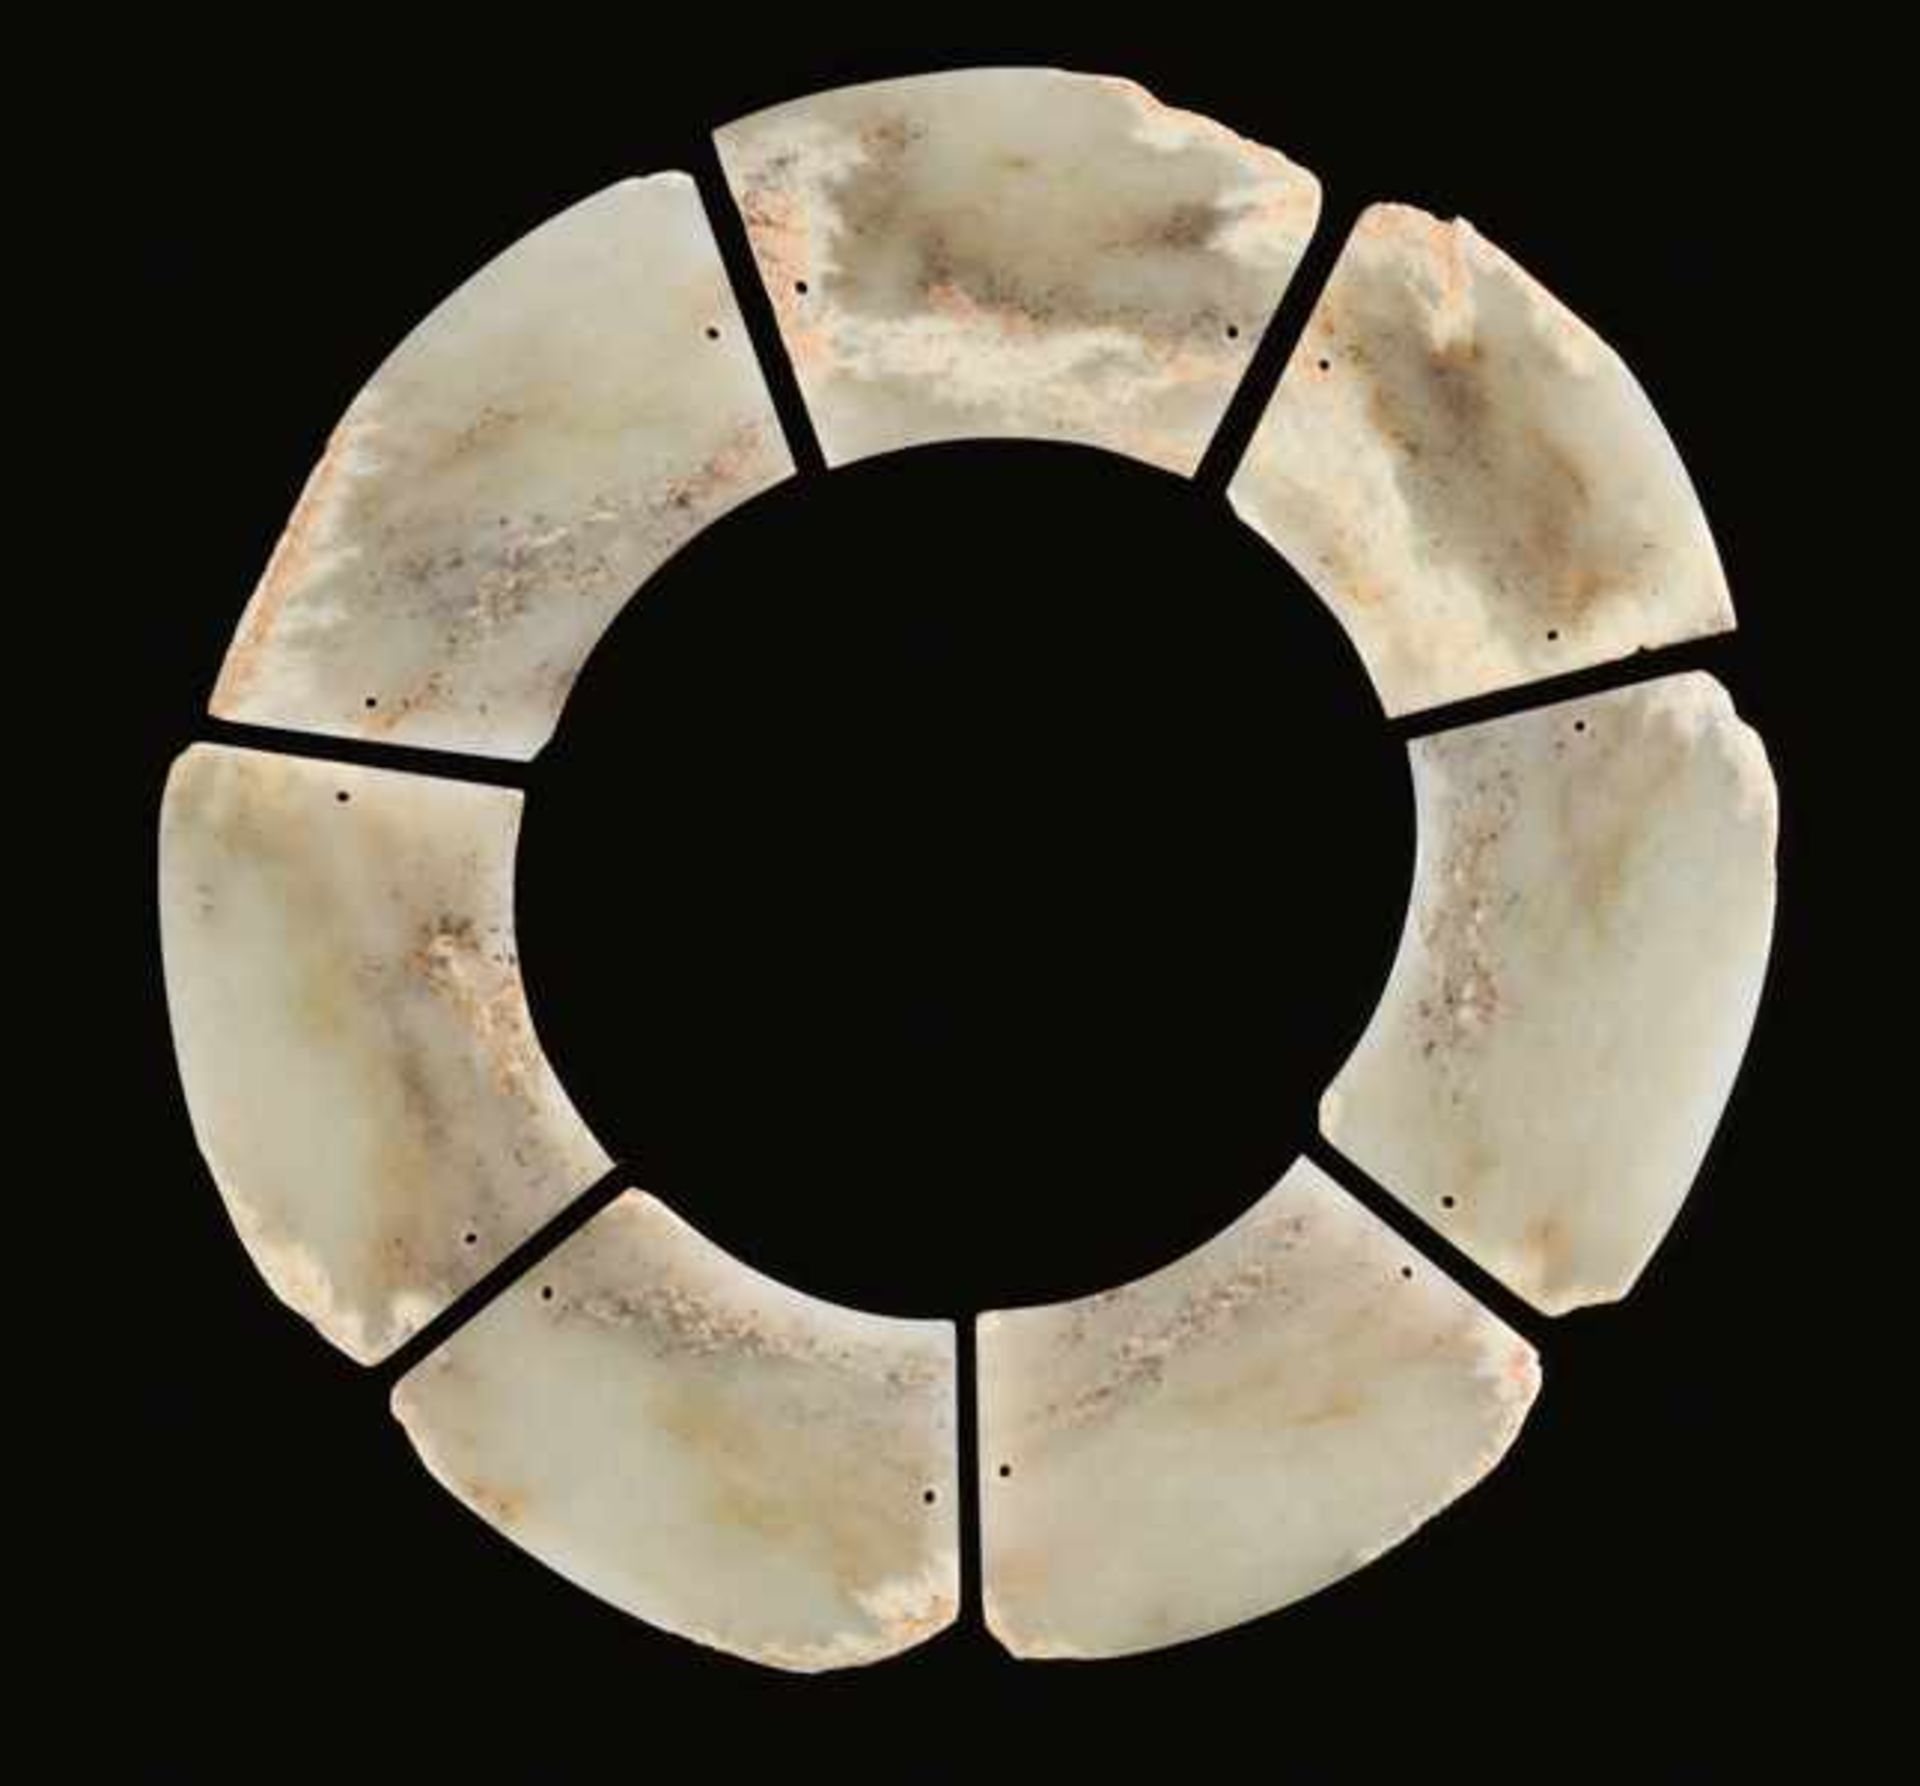 AN EXTREMELY RARE COMPOSITE DISC IN SEVEN SECTIONS CARVED FROM A BLOCK OF YELLOW-COLOURED JADE Jade. - Image 2 of 4